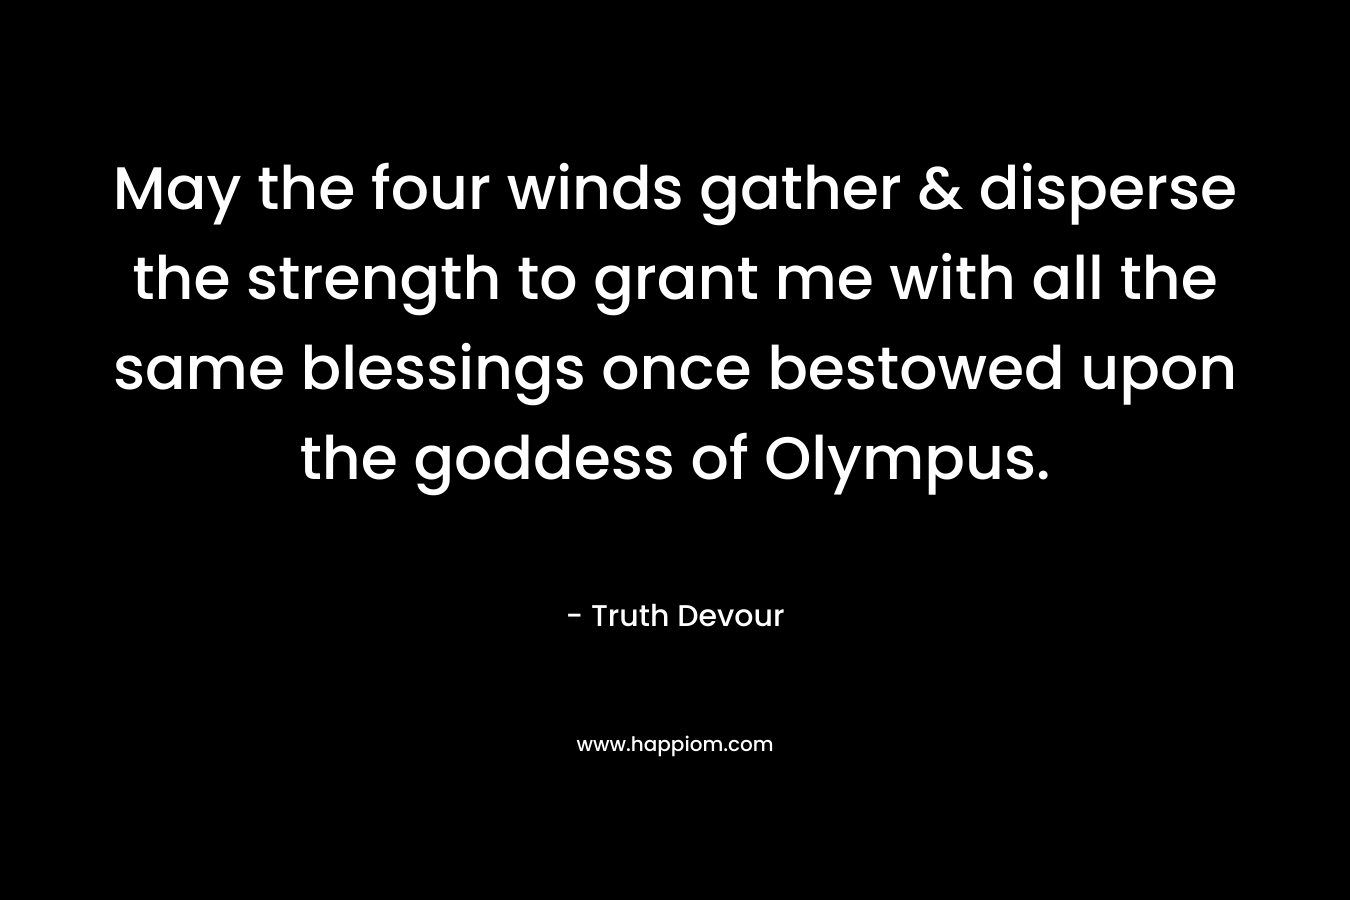 May the four winds gather & disperse the strength to grant me with all the same blessings once bestowed upon the goddess of Olympus.